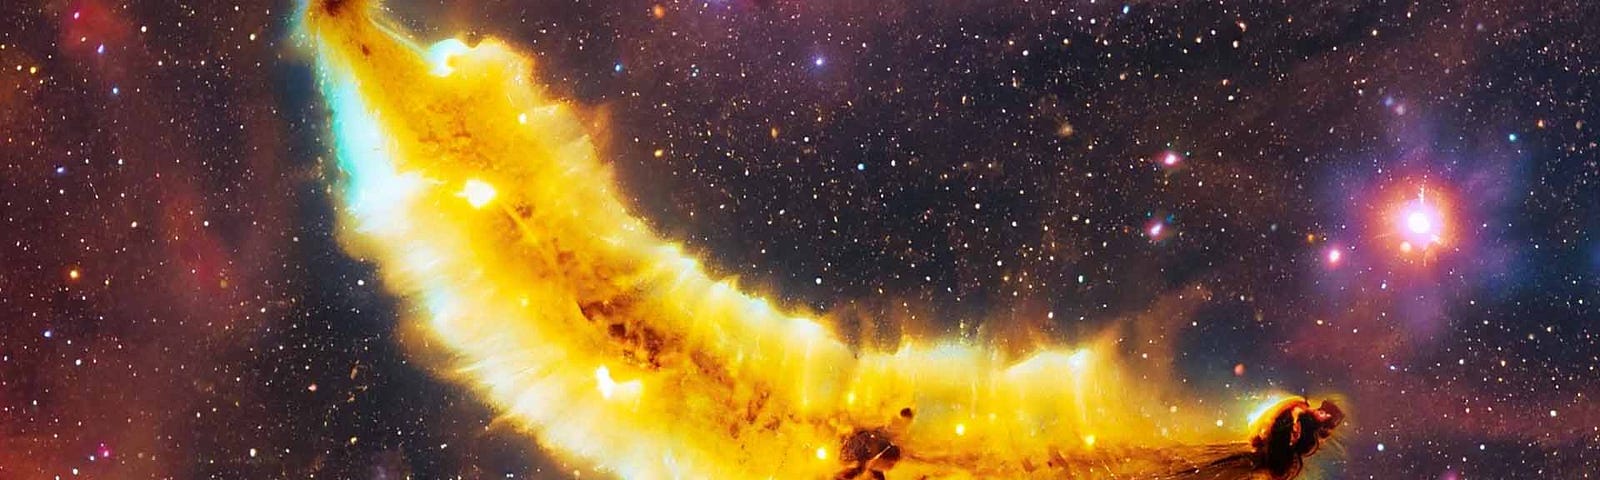 A cluster of stars forming the shape of a banana.